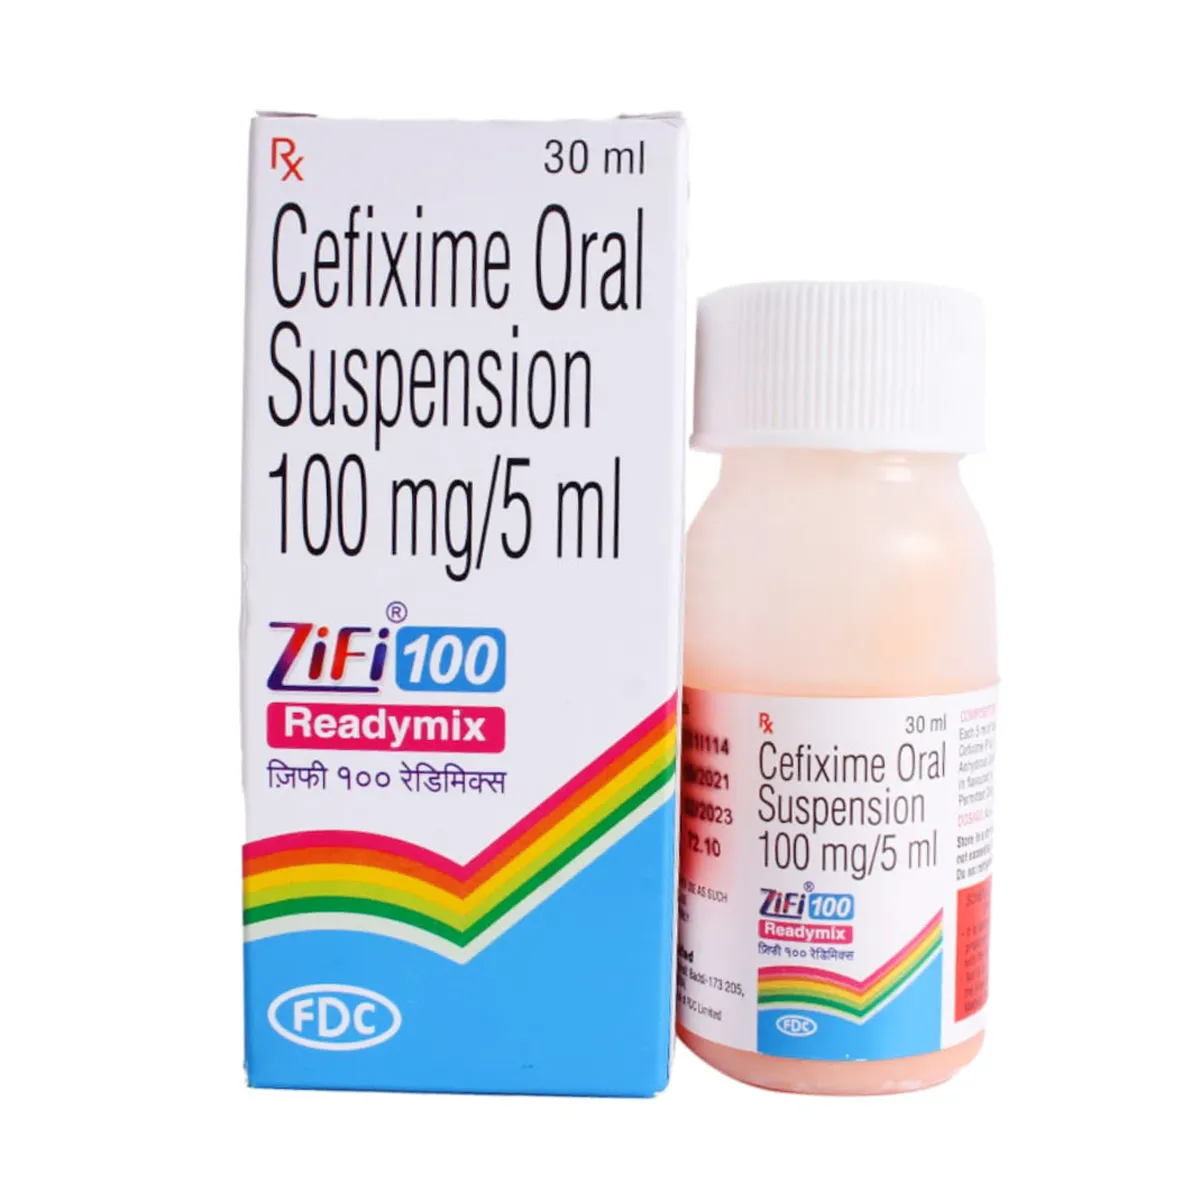 Zifi 100 Readymix Oral Suspension